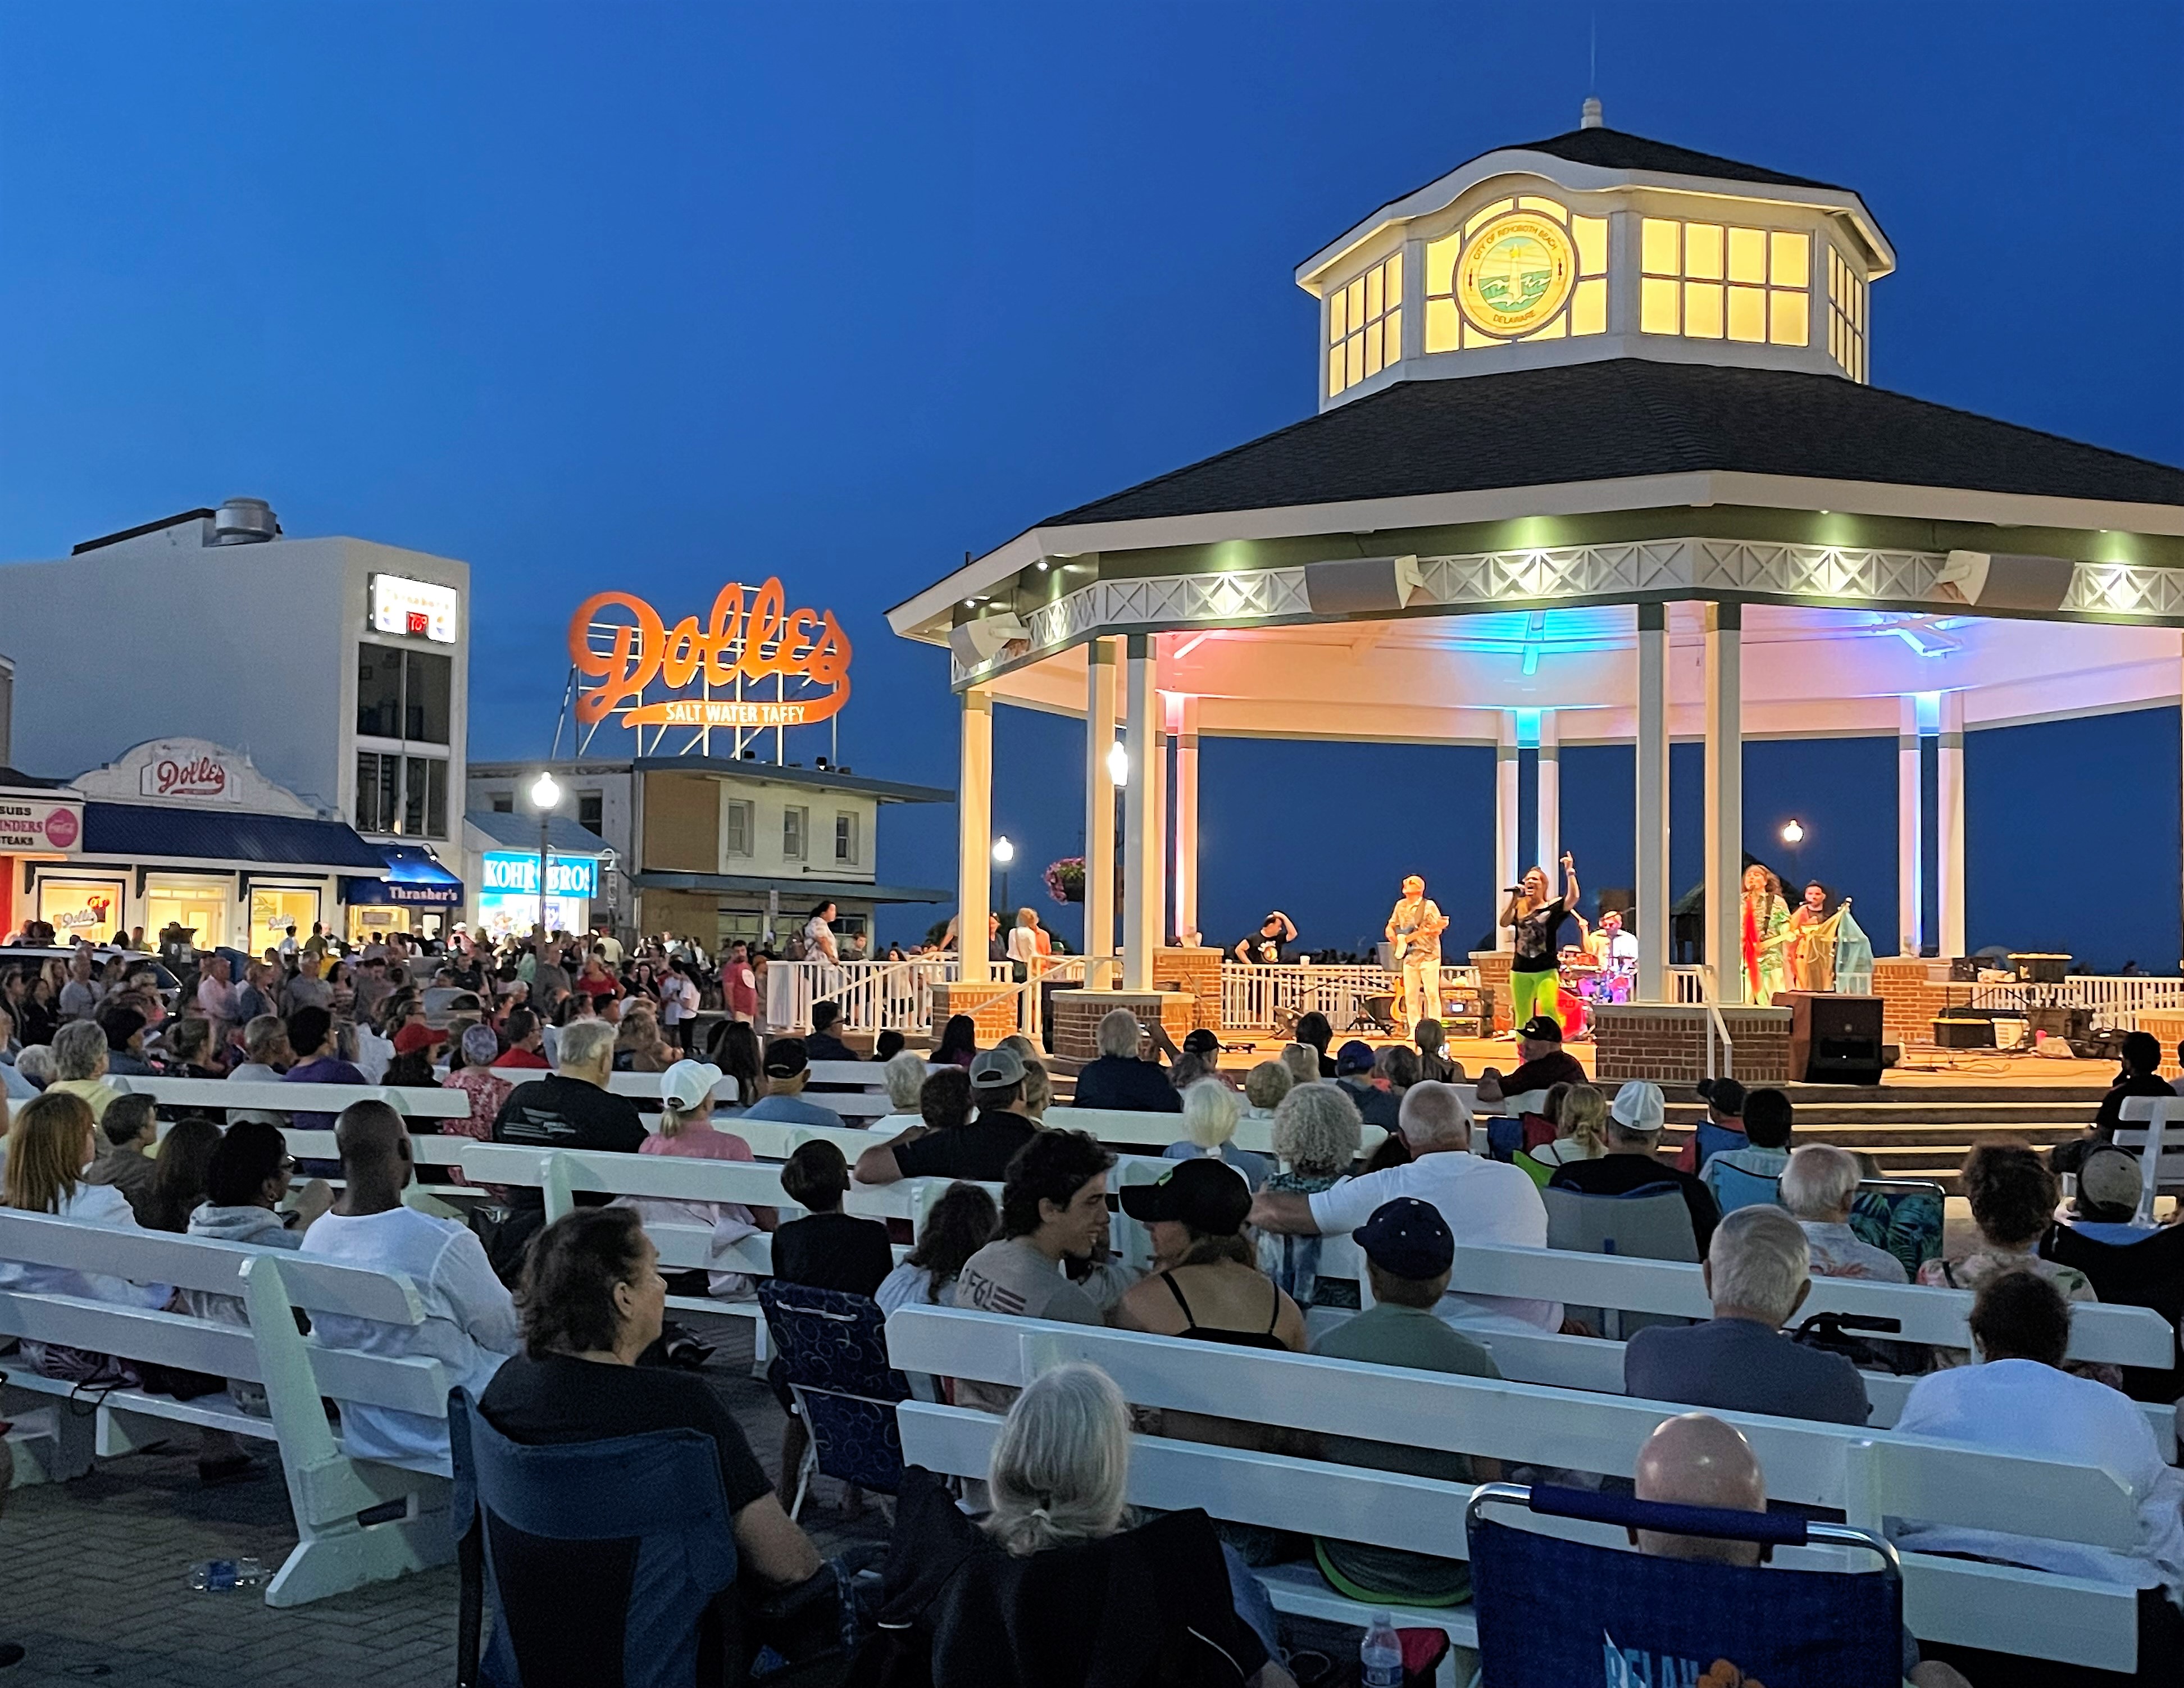 Rehoboth Beach Bandstand City of Rehoboth